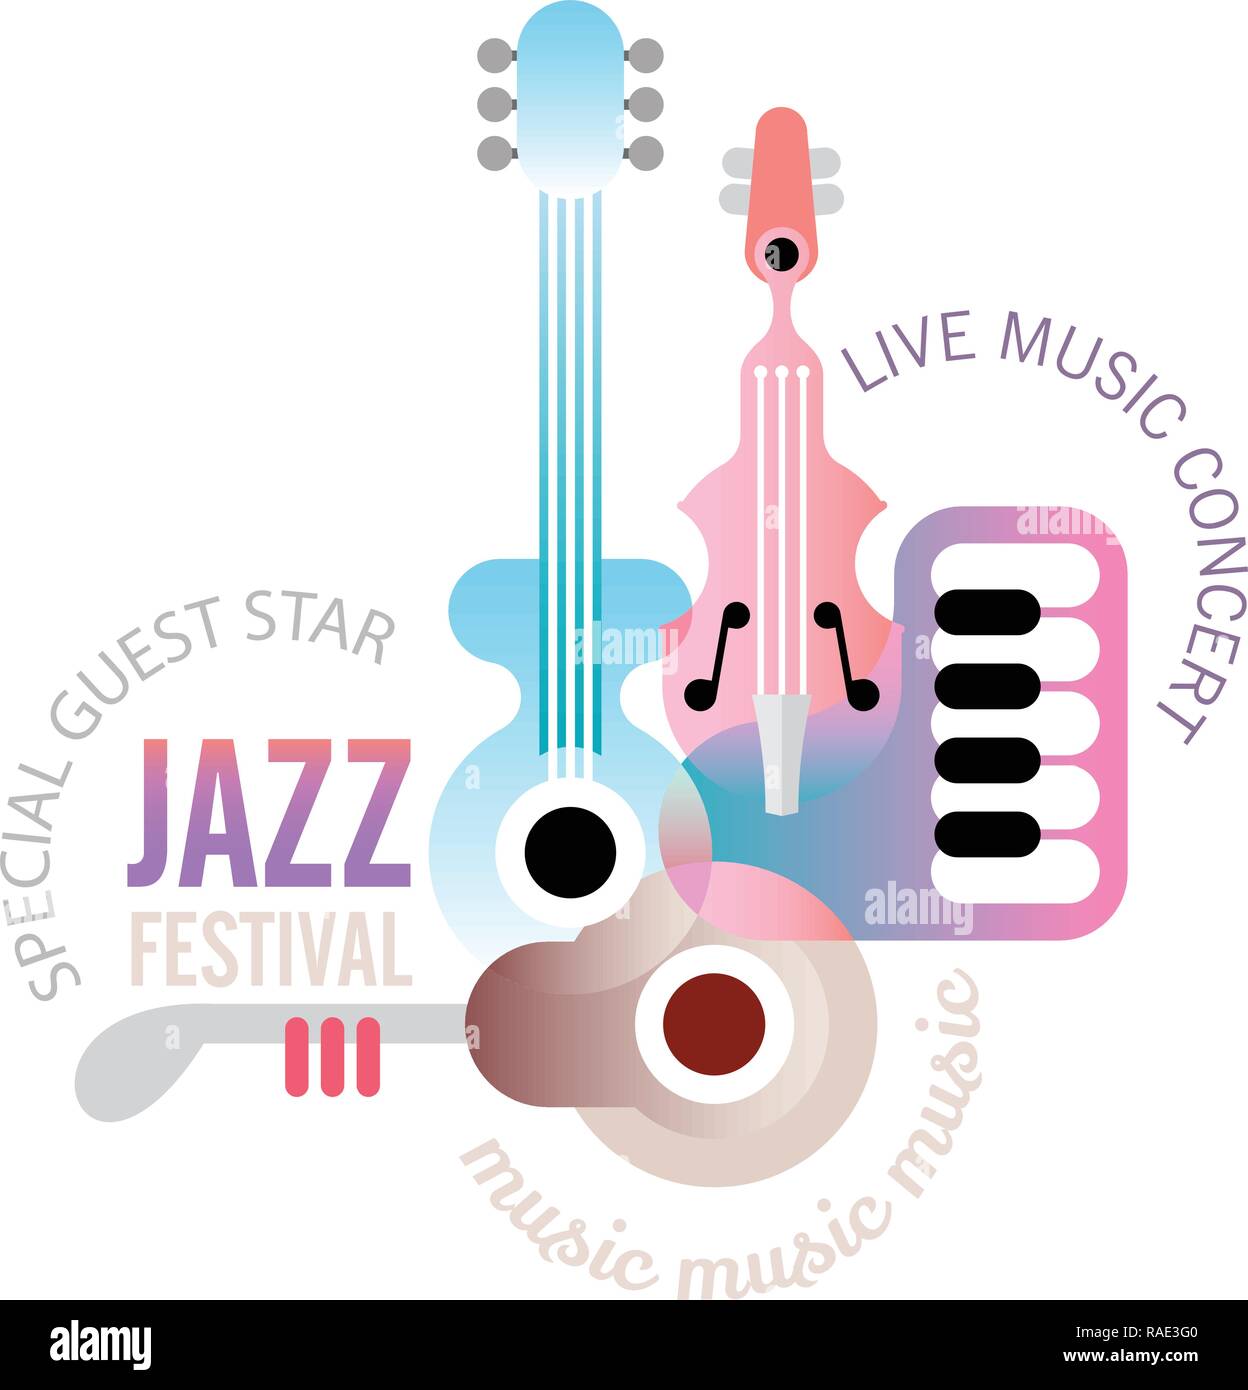 Music festival vector poster design isolated on a white background. Art composition of musical instruments and text. Jazz band. Stock Vector